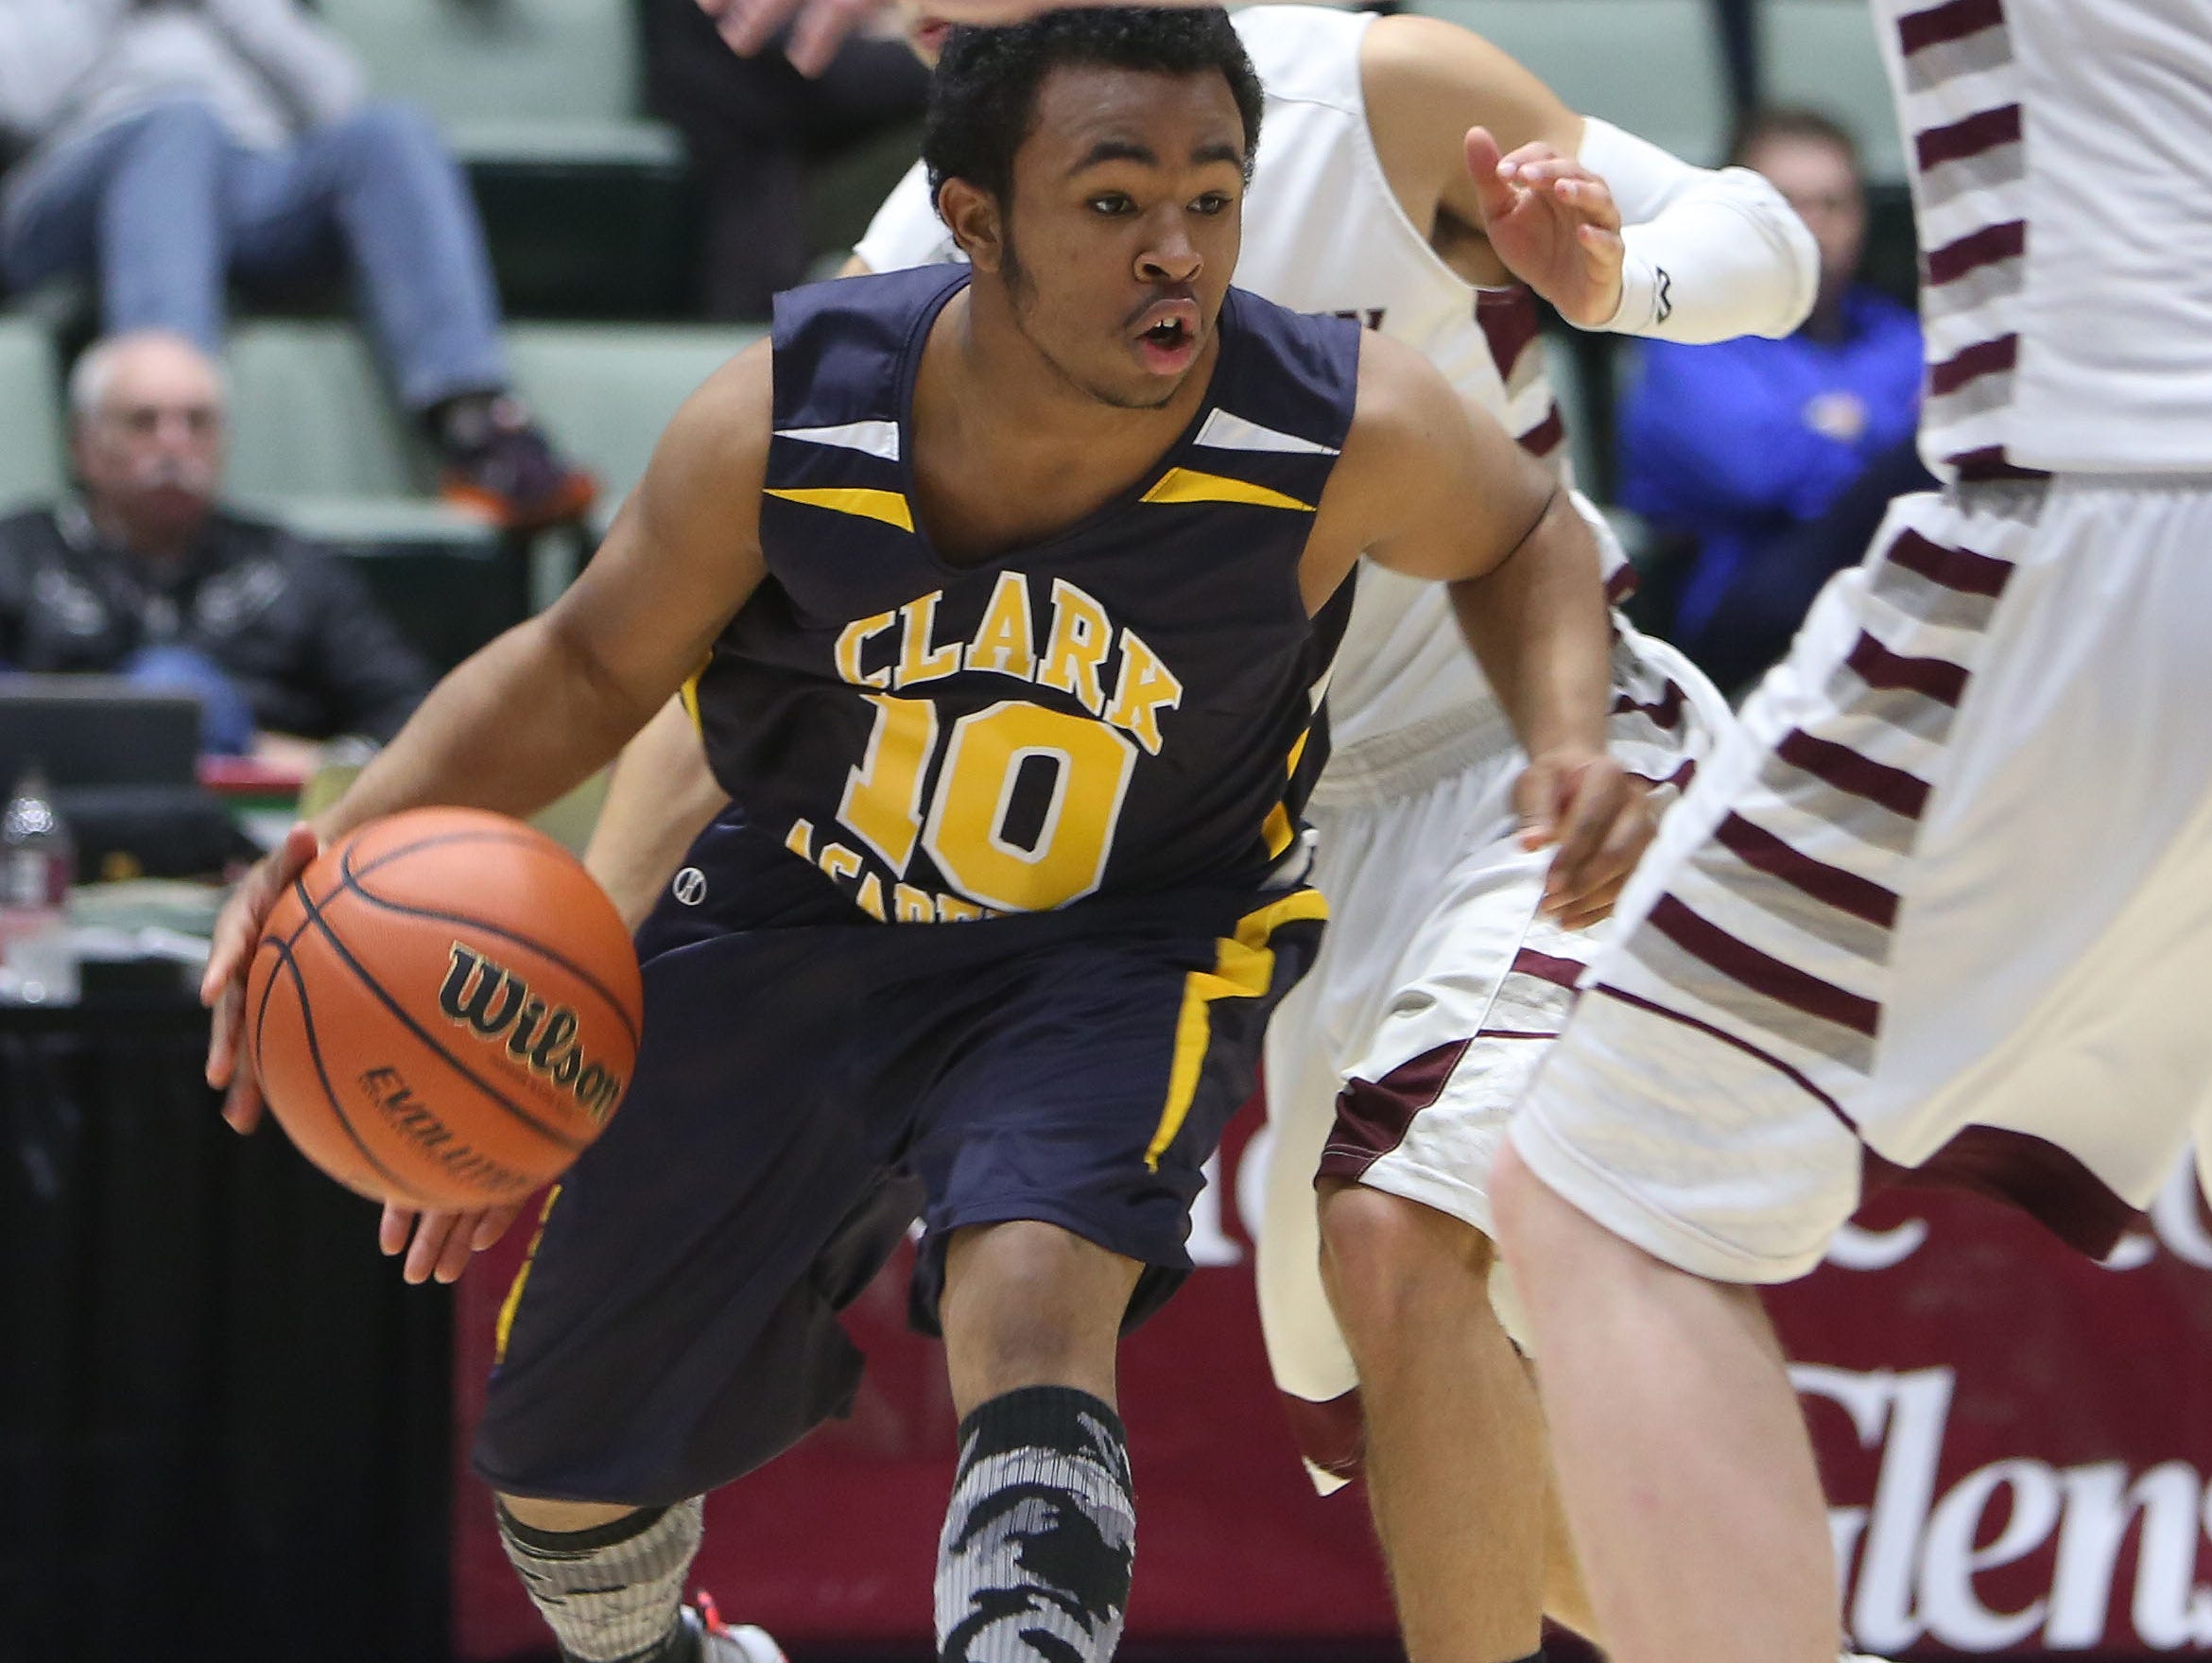 Clark Academy's Brice Banks (10) tries to drive to the basket against Oriskany during the boys Class D semifinal at the Glens Falls Civic Center March 11, 2016. Oriskany won the game 59-40.